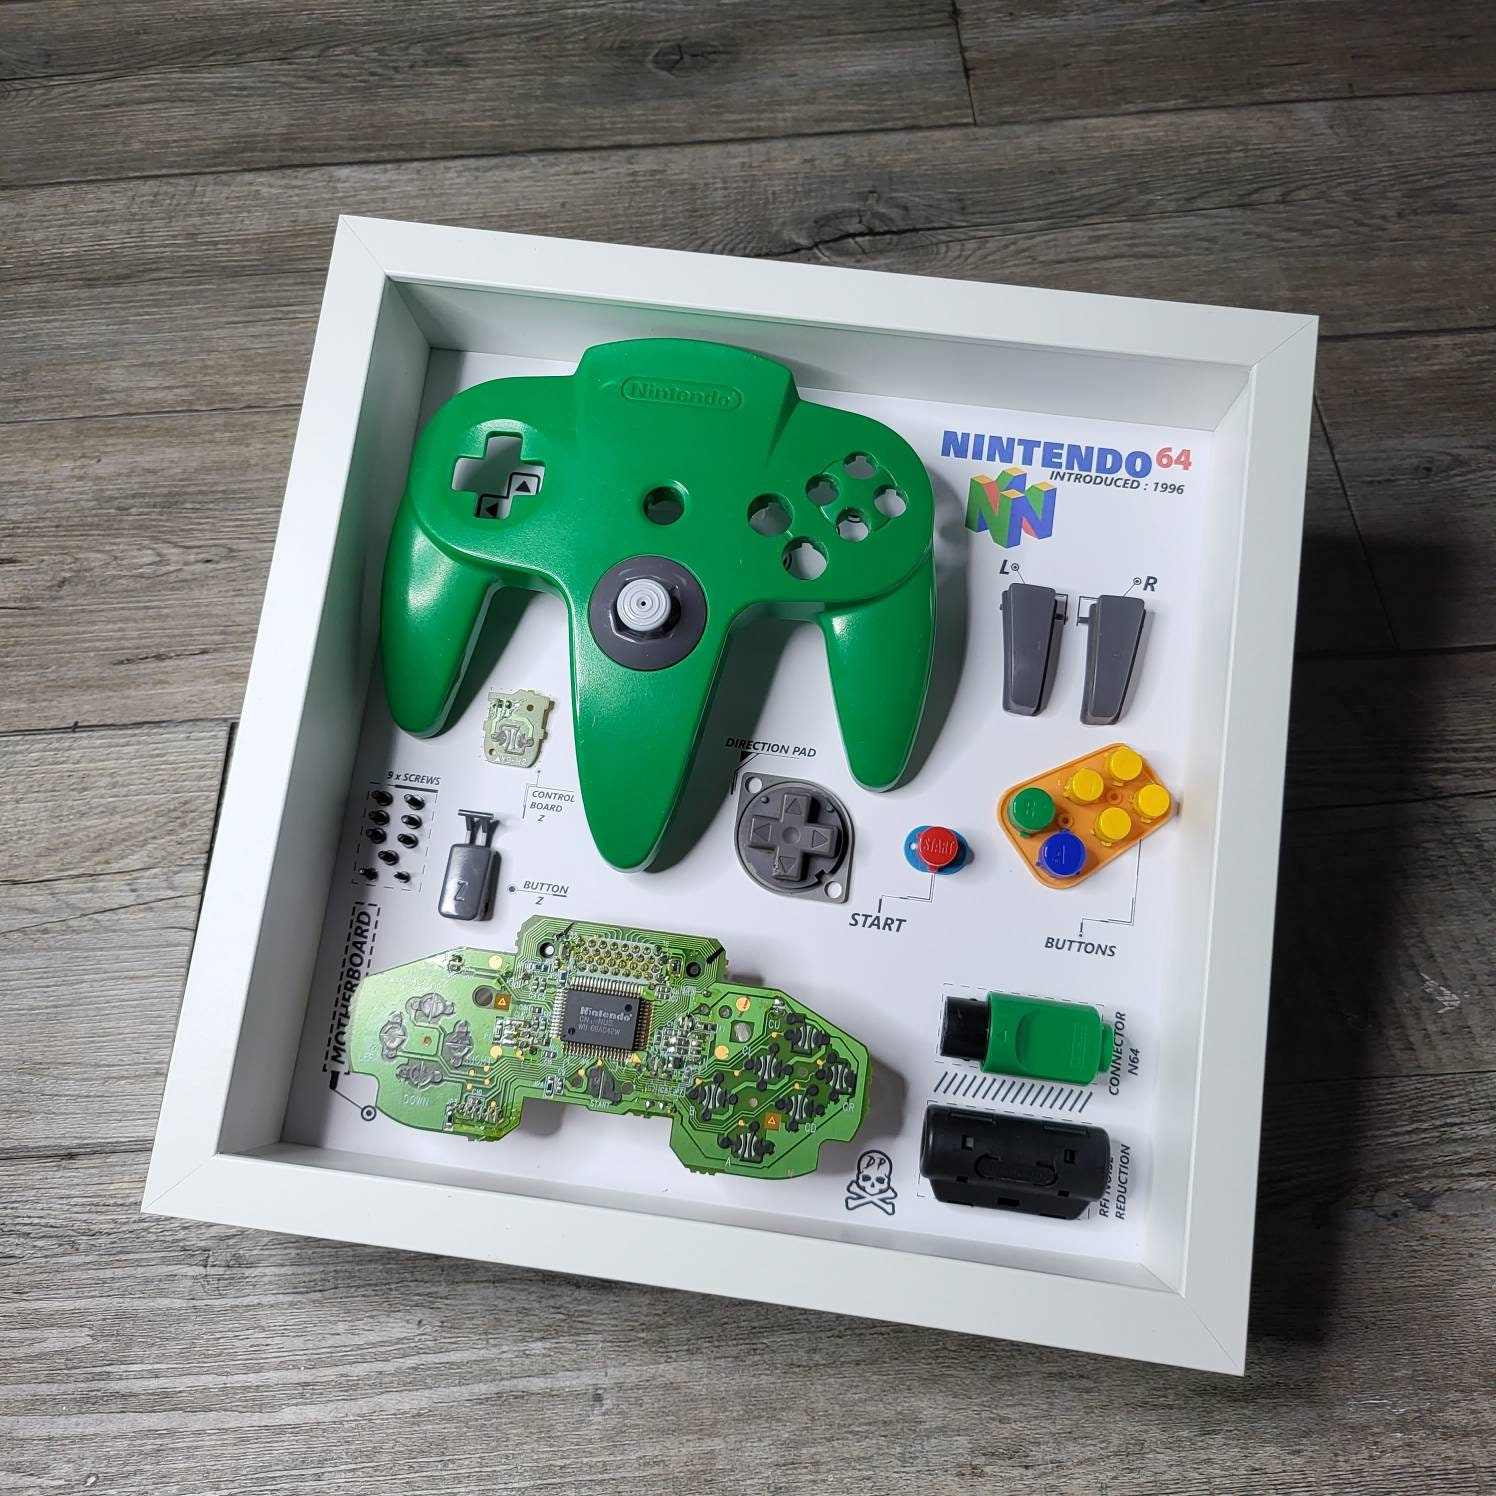 Game Cube Gamecube Shadowbox Diorama Controller Disassembled Console Wall  Art Gifts for Friends Wall Decor Custom Painting Nerd Geek Nintendo -   Denmark